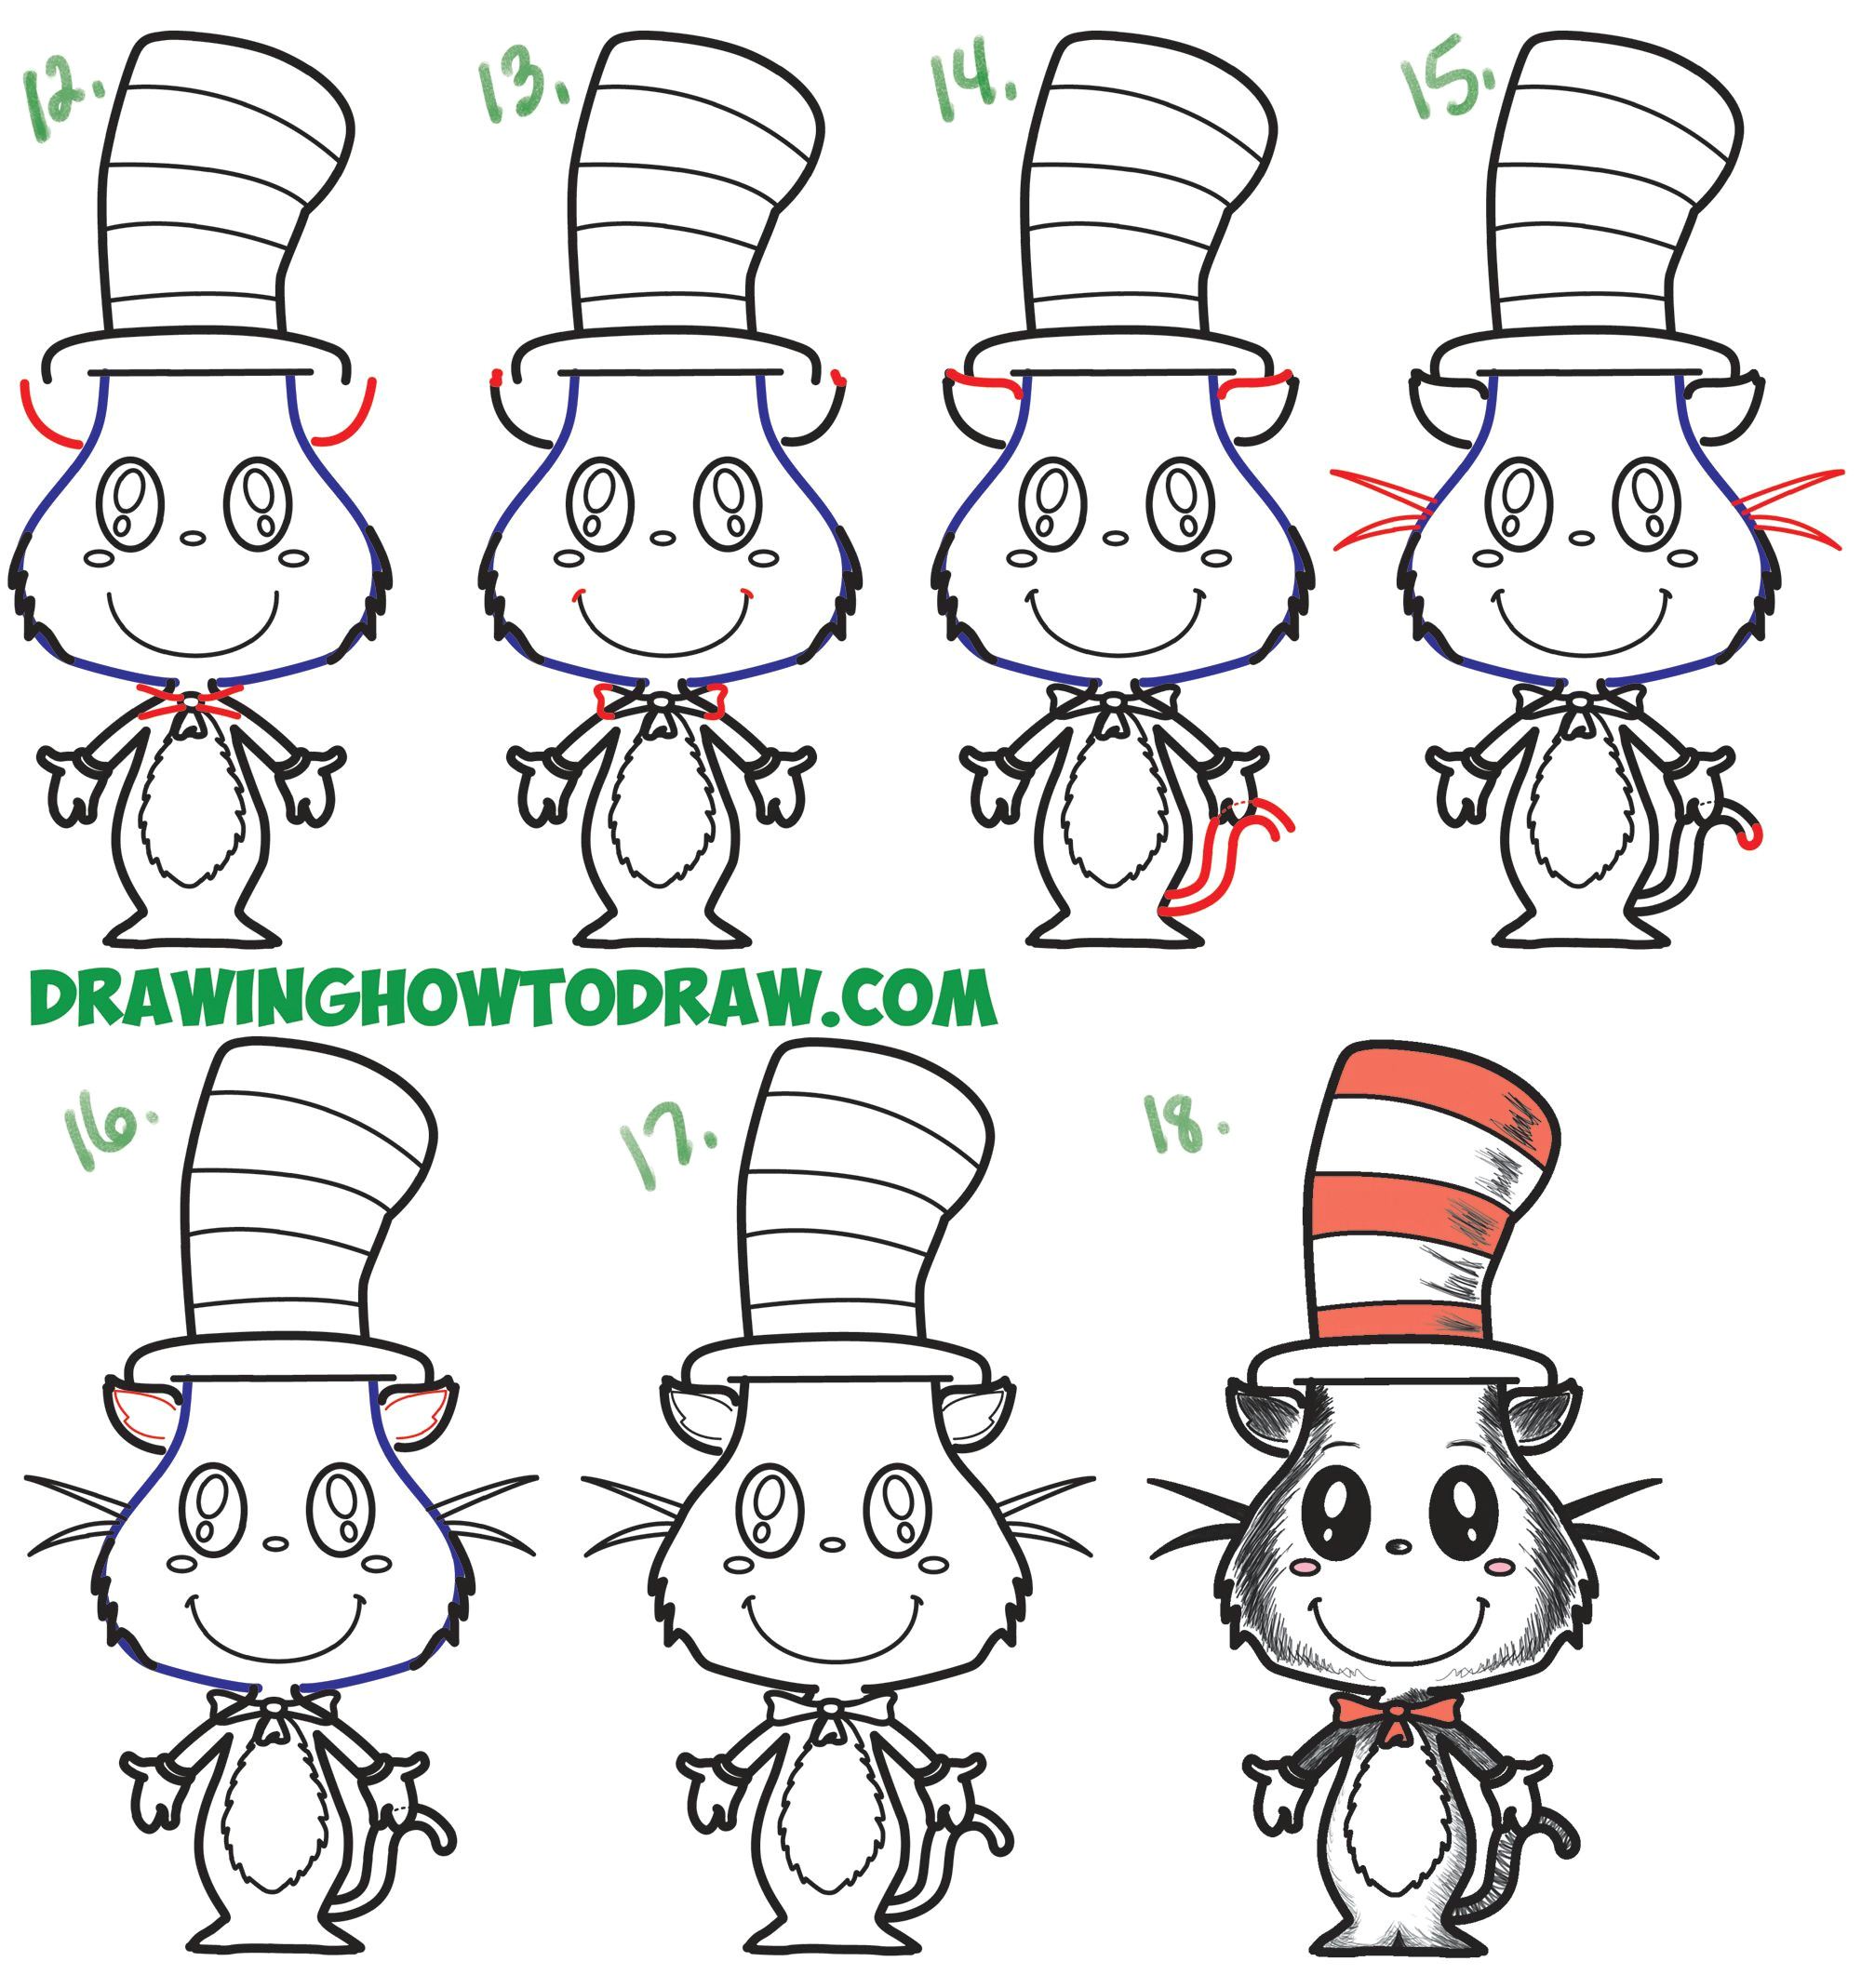 Easy Drawing Zebra How to Draw the Cat In the Hat Cute Kawaii Chibi Version Easy